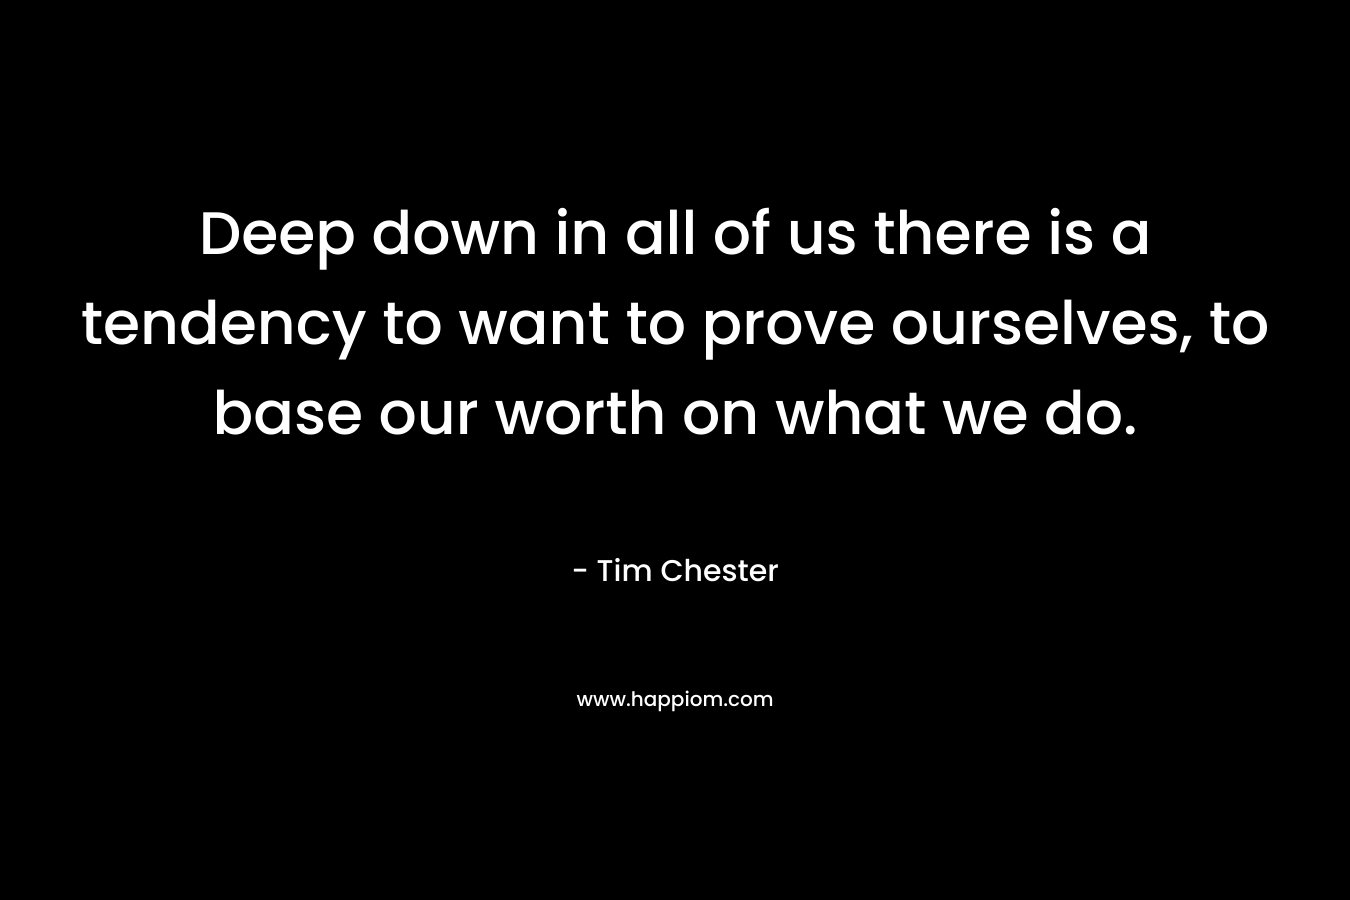 Deep down in all of us there is a tendency to want to prove ourselves, to base our worth on what we do. – Tim Chester